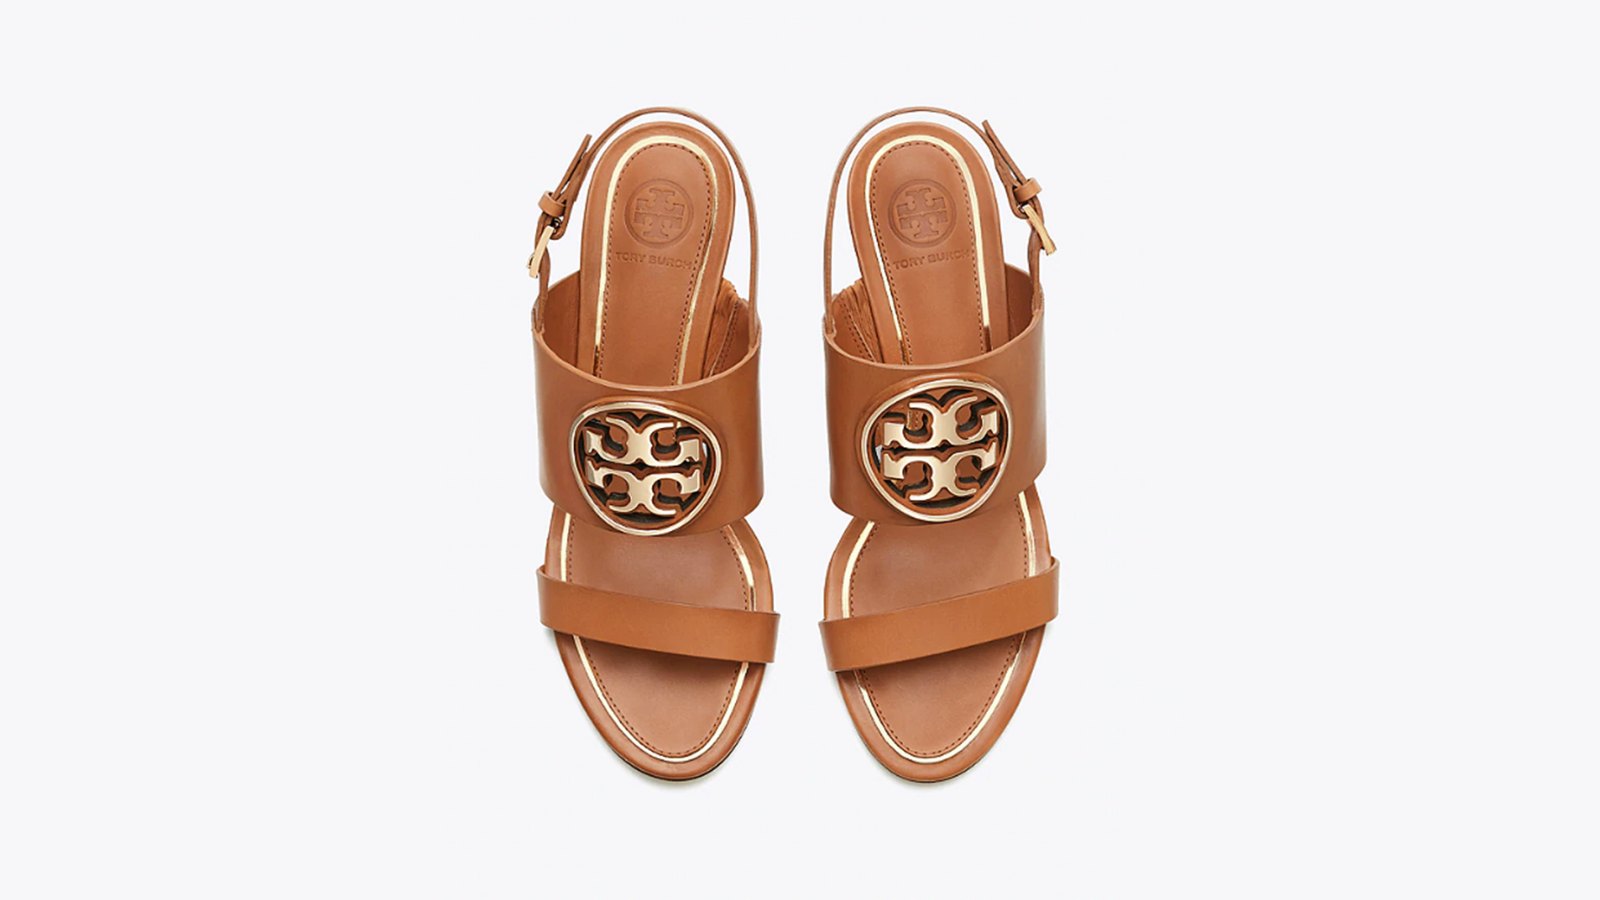 Tory Burch Semi-Annual Sale: 11 New Picks Up to 70% Off